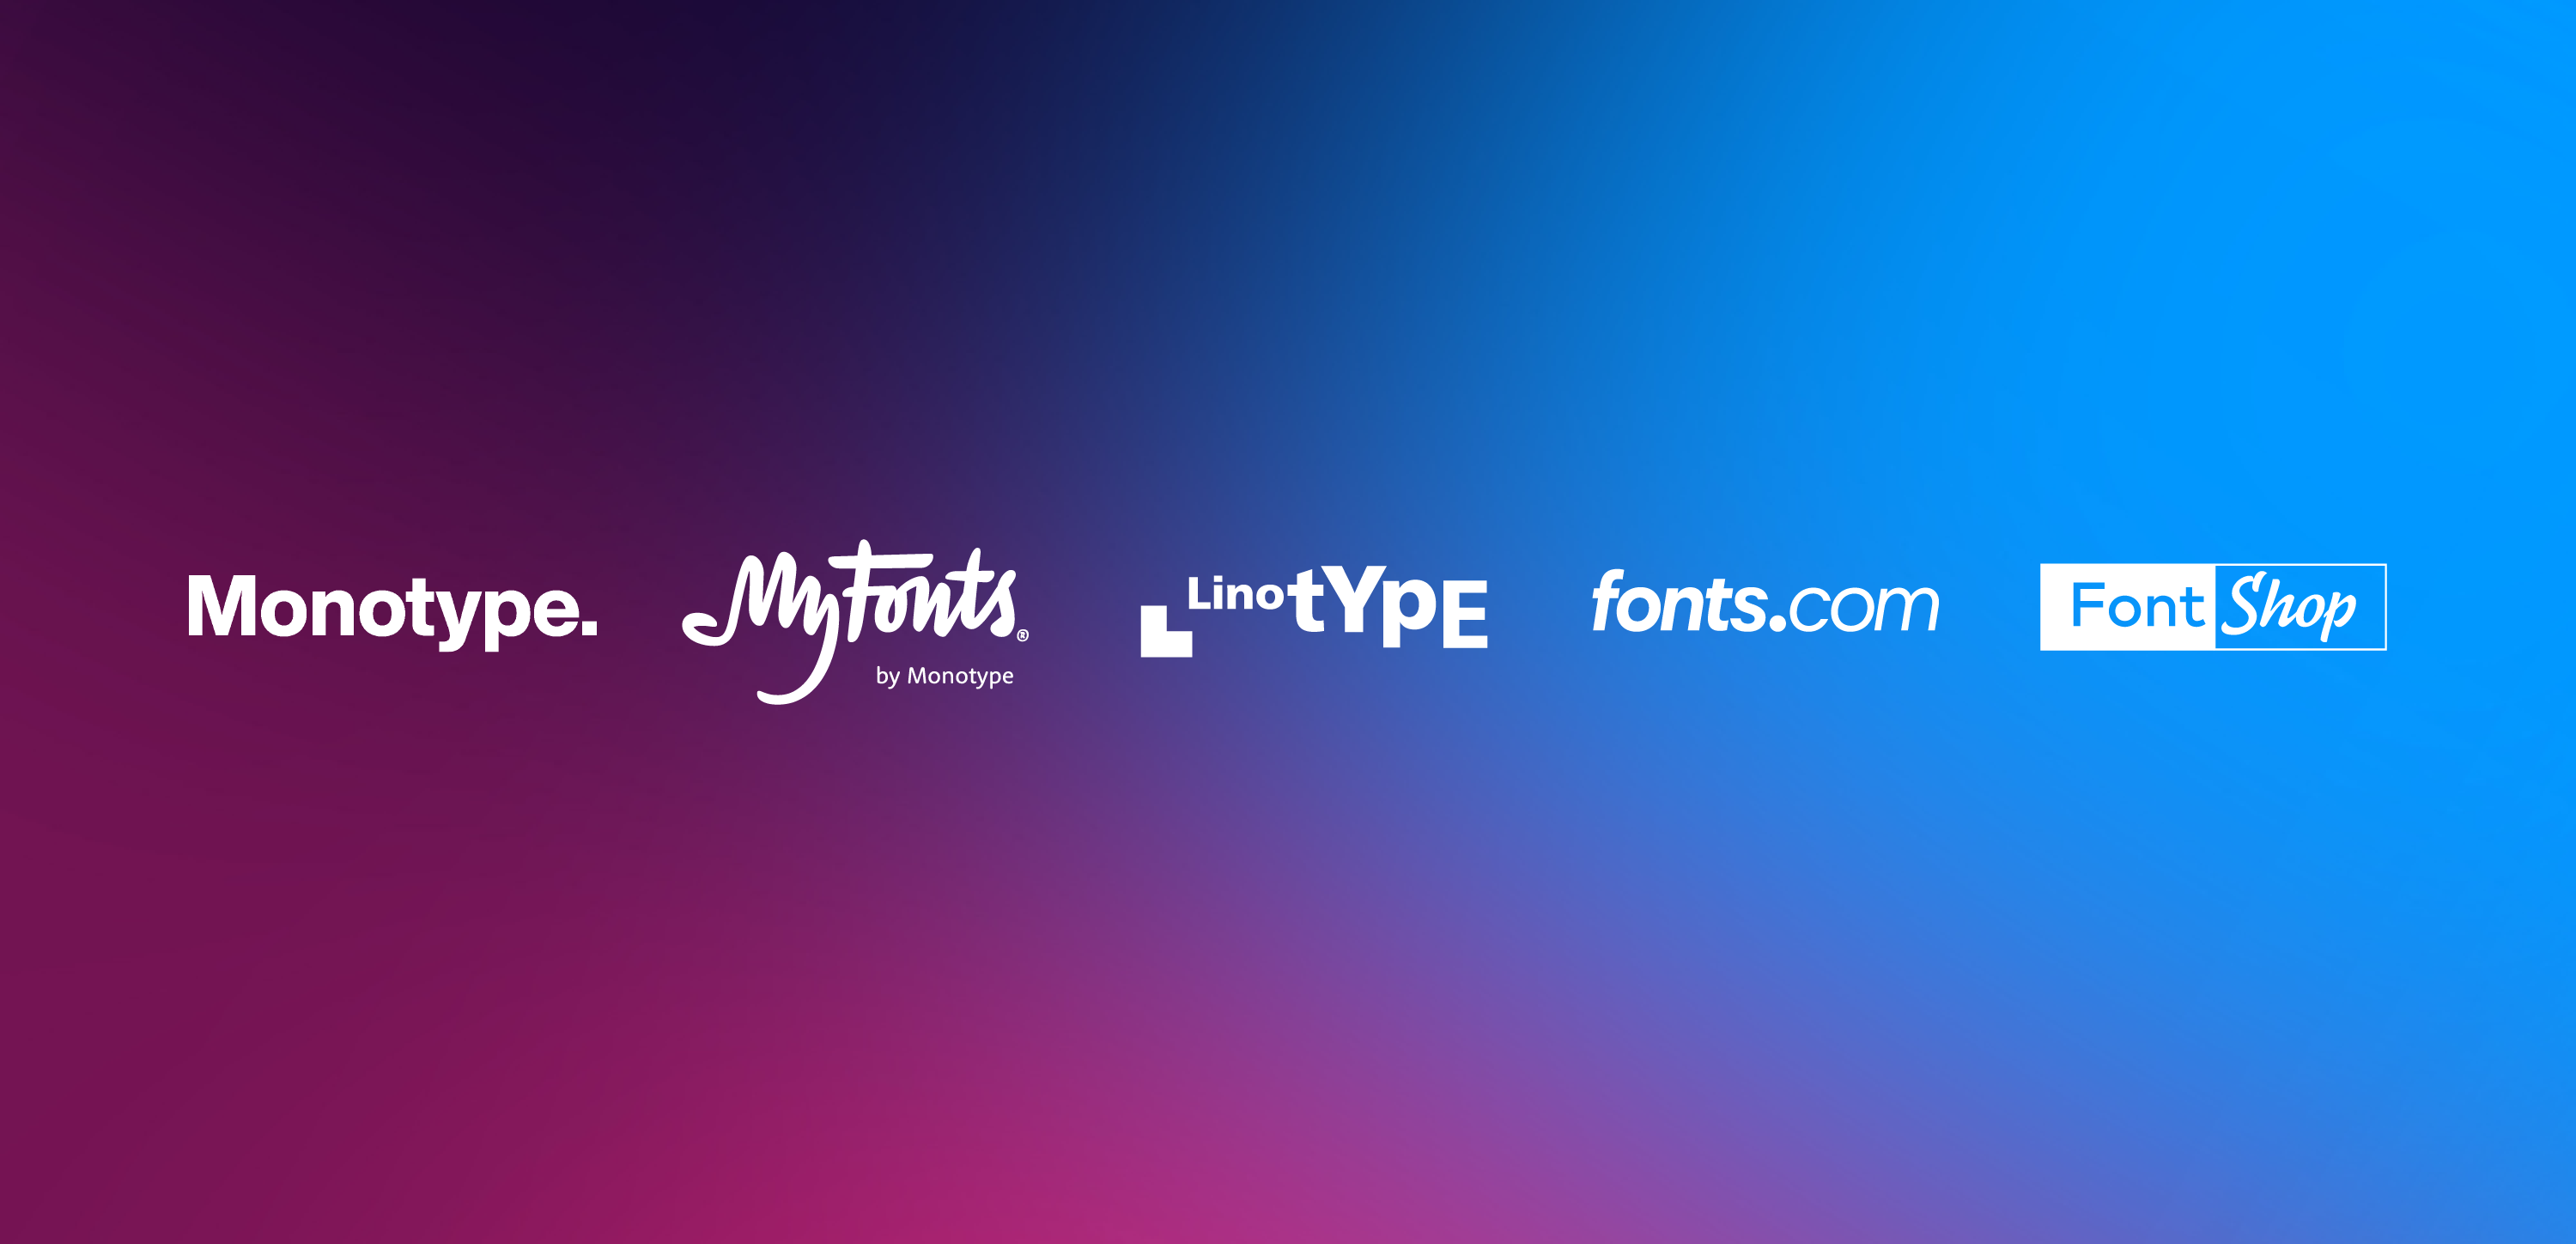 Monotype_Background_logos-01.png